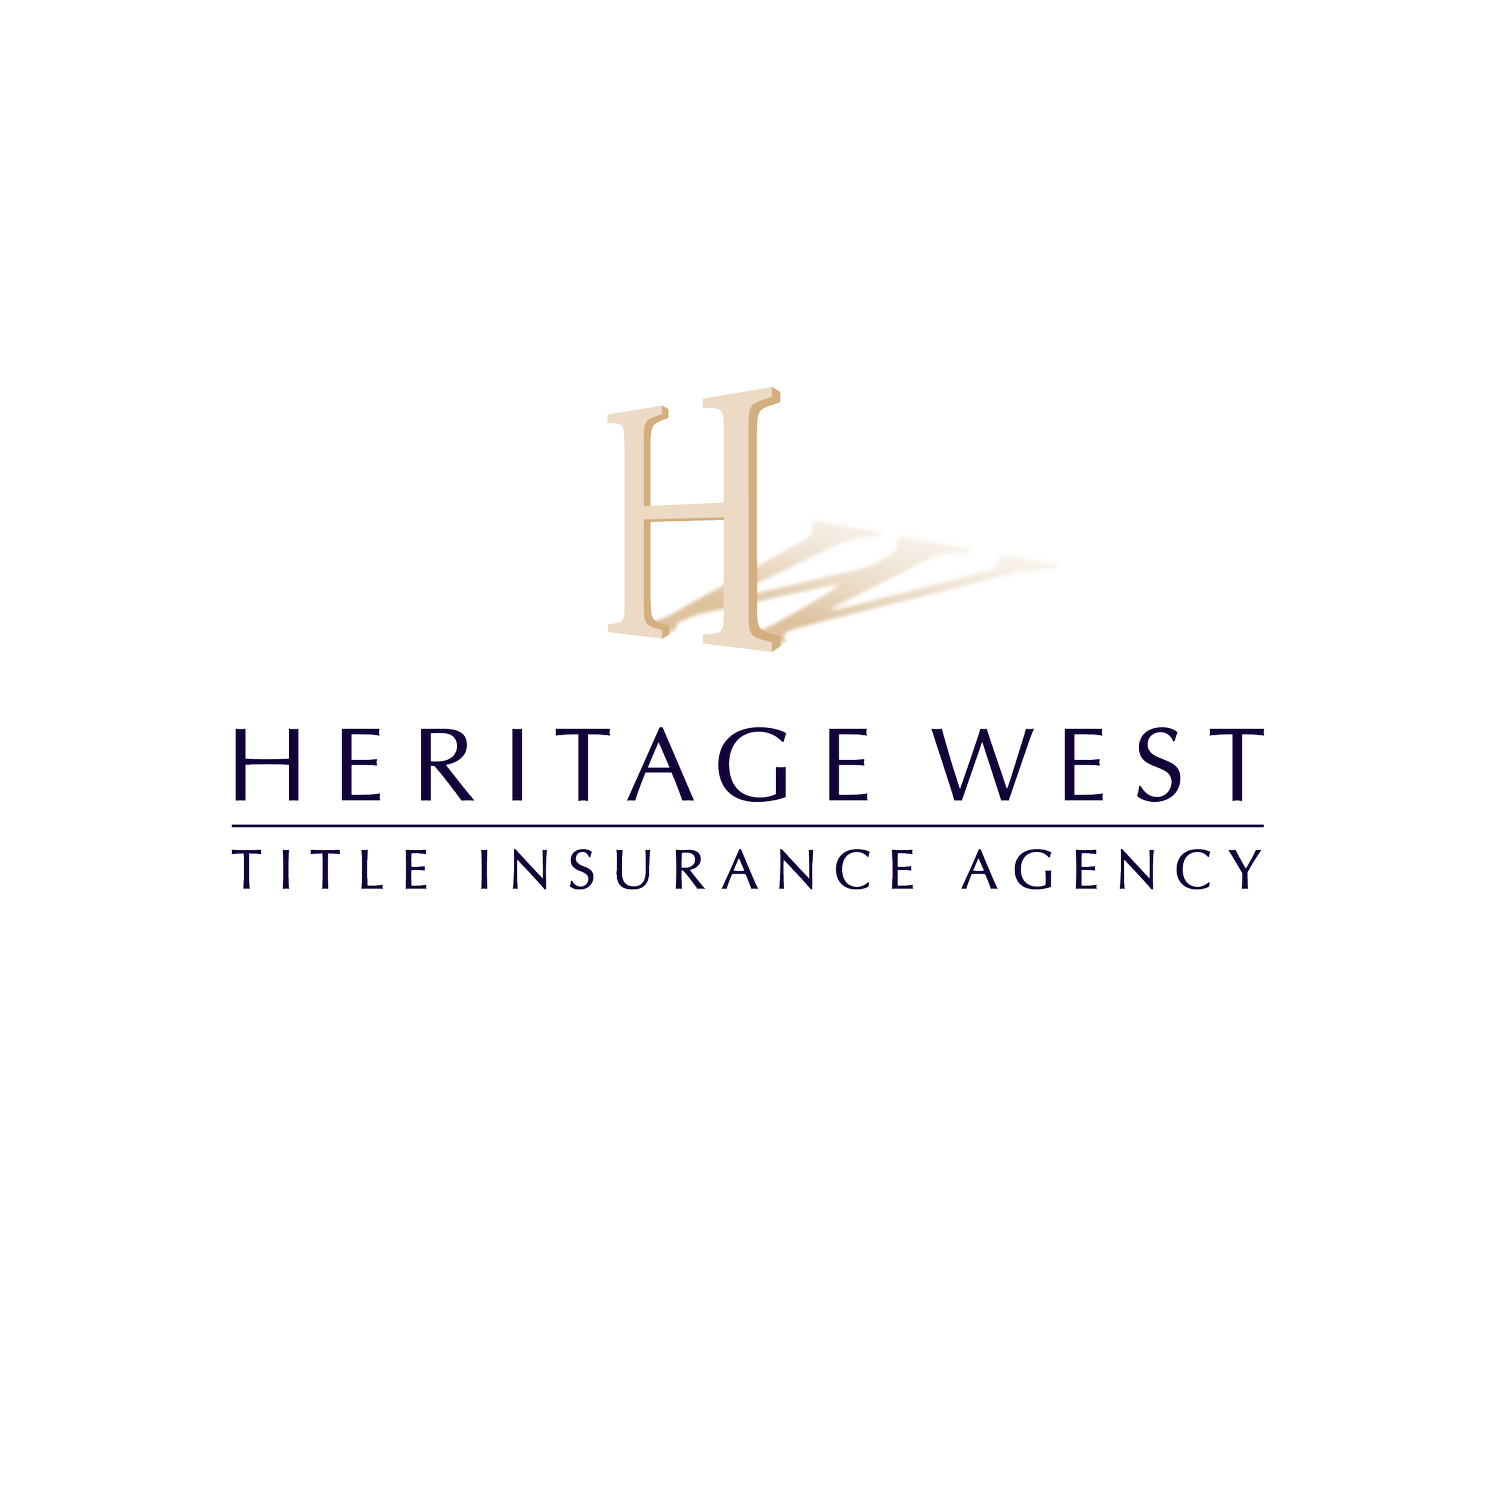 Heritage West Title